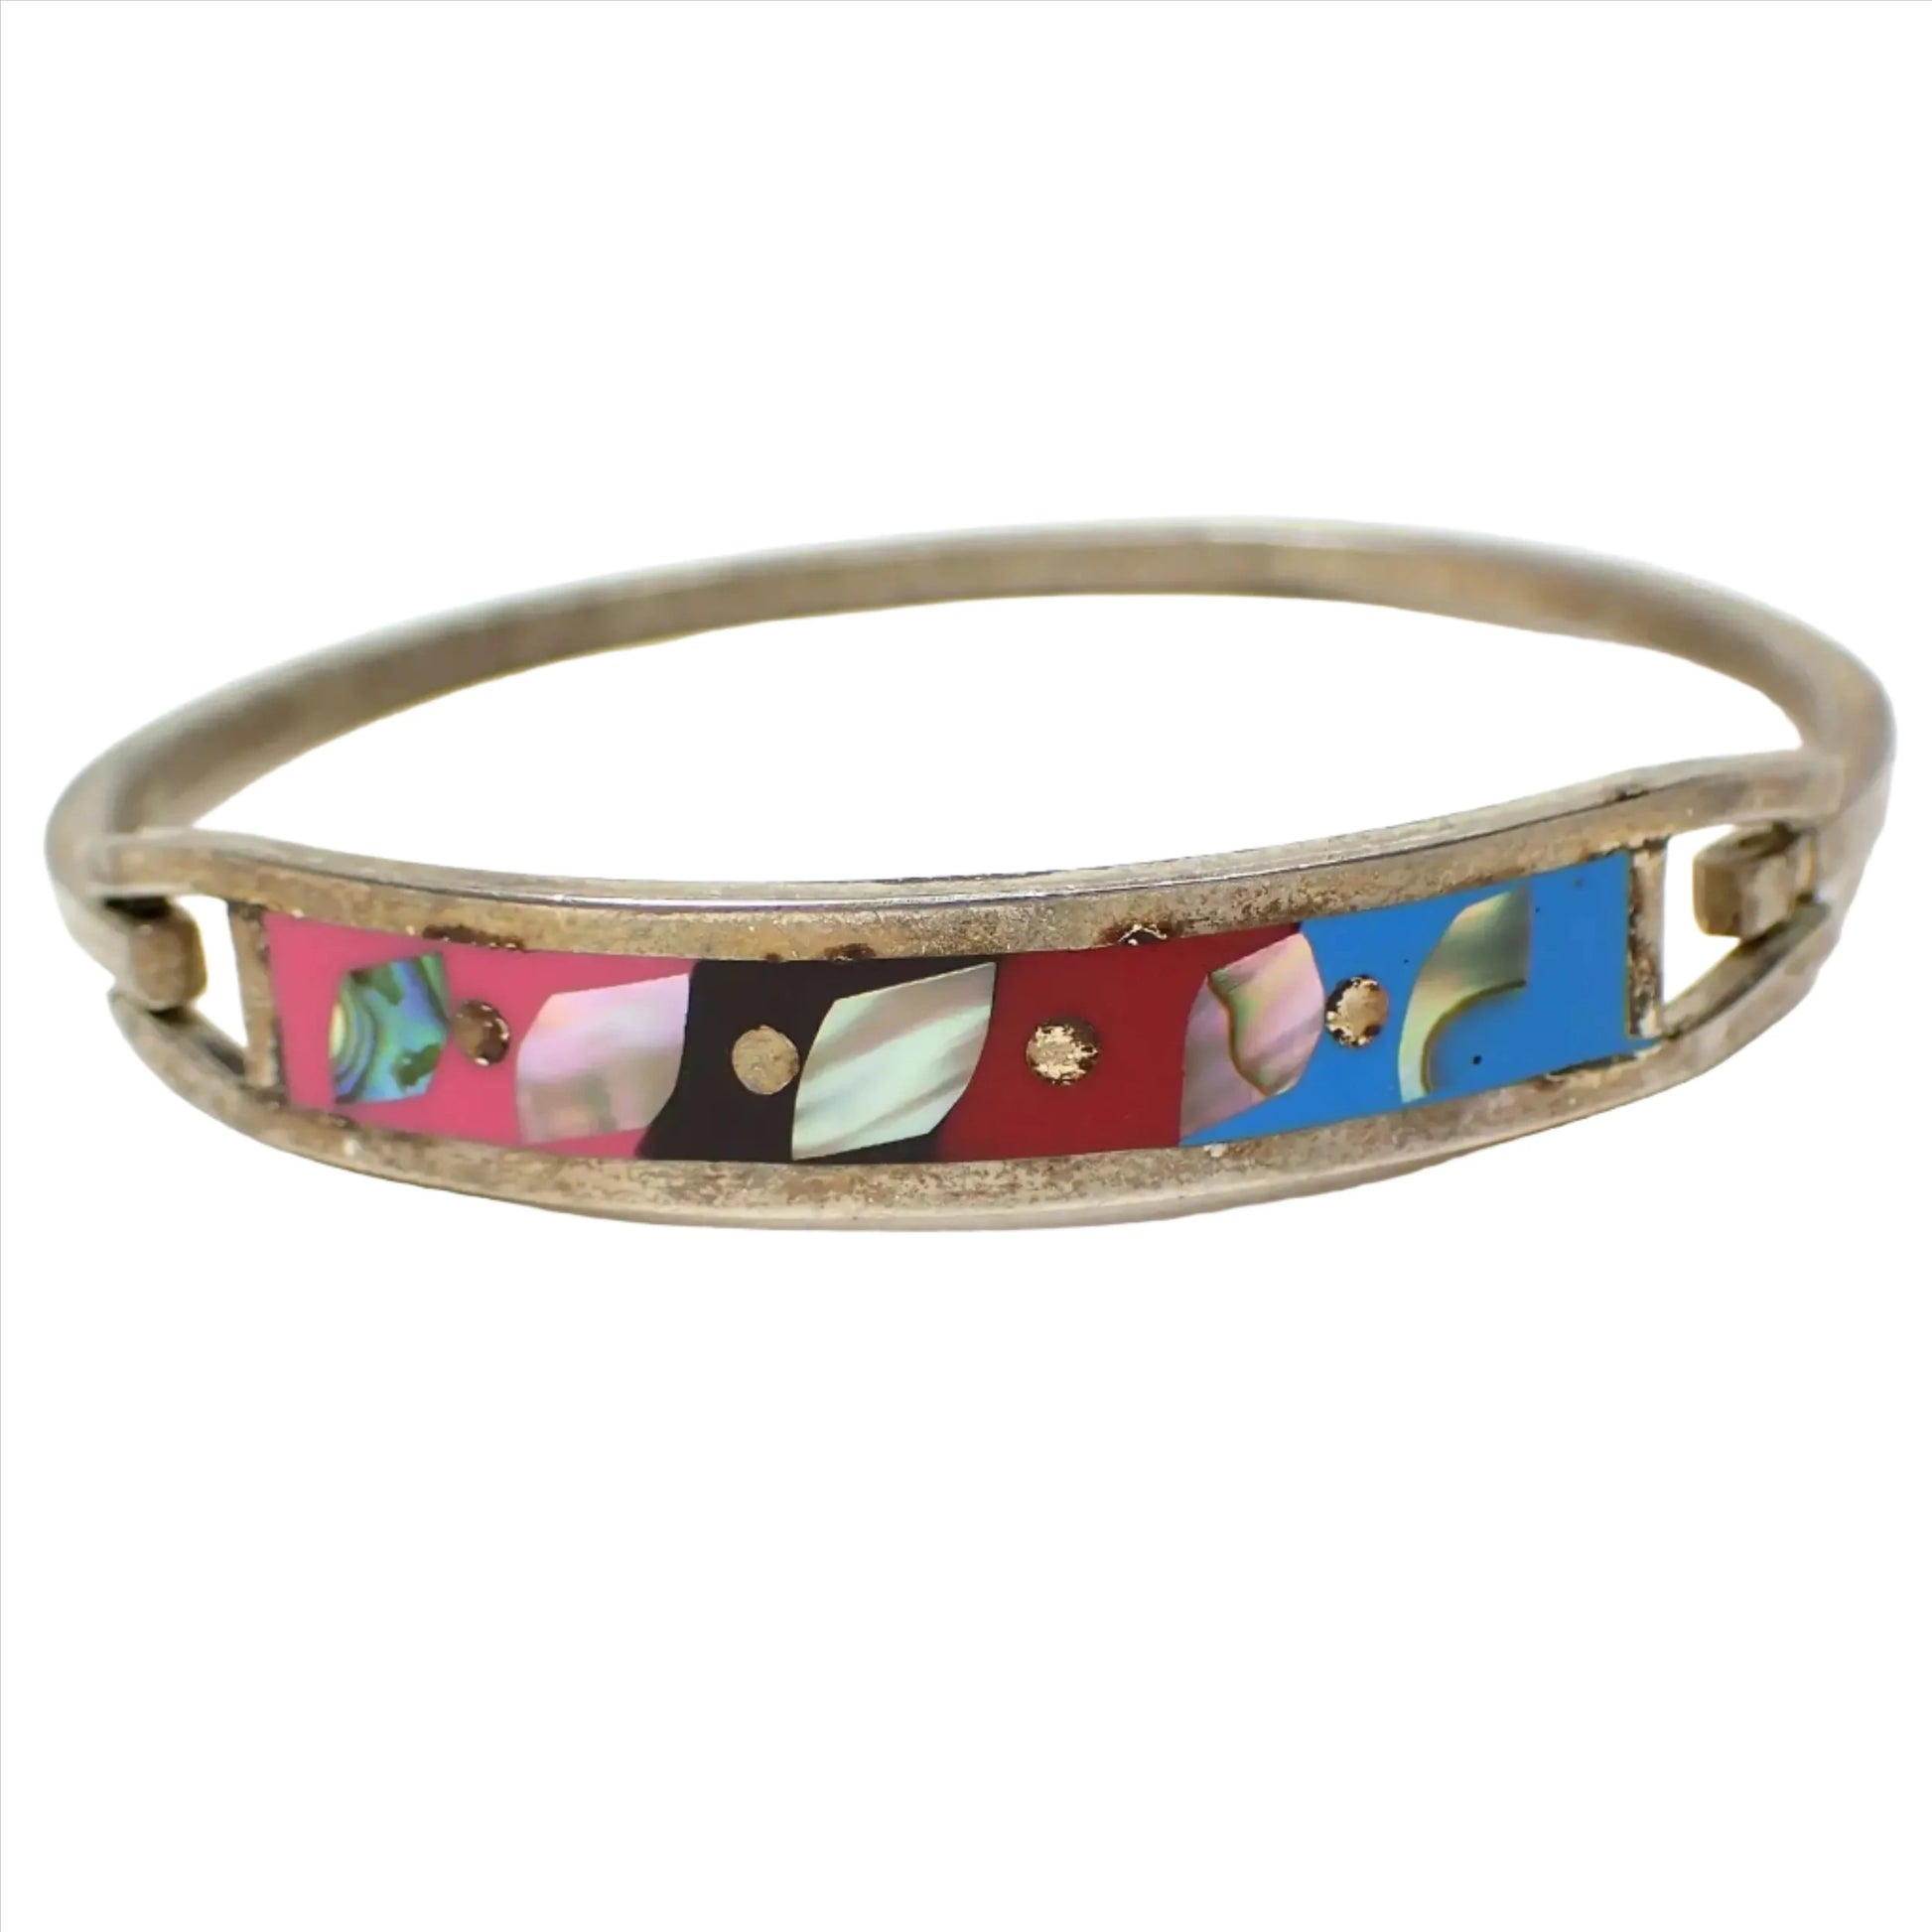 Front view of the retro vintage hinged bangle bracelet made in Mexico. The metal is darkened silver tone in color. There is a curved band on the front with pink, black, red, and blue resin that has small pieces of inlaid abalone shell in them.